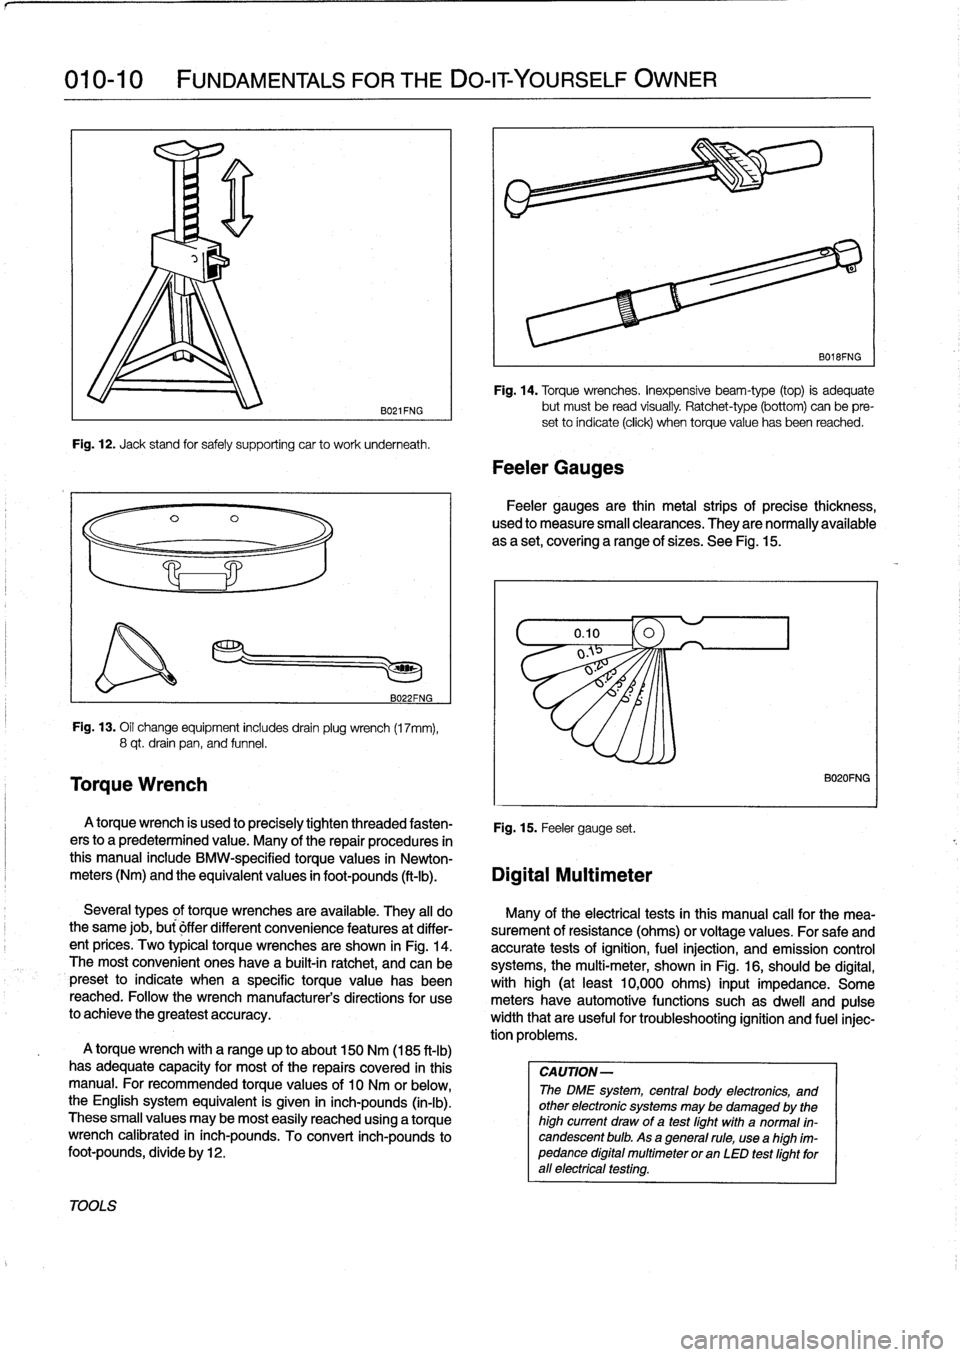 BMW 325i 1992 E36 Workshop Manual 
010-10

	

FUNDAMENTALS
FOR
THE
DO-IT
YOURSELF
OWNER

TOOLS

Torque
Wrench

B021FNG

Fig
.
12
.
Jack
stand
for
safely
supporting
car
to
work
underneath
.

B022FNG

Fig
.
13
.
Oil
change
equipment
inc